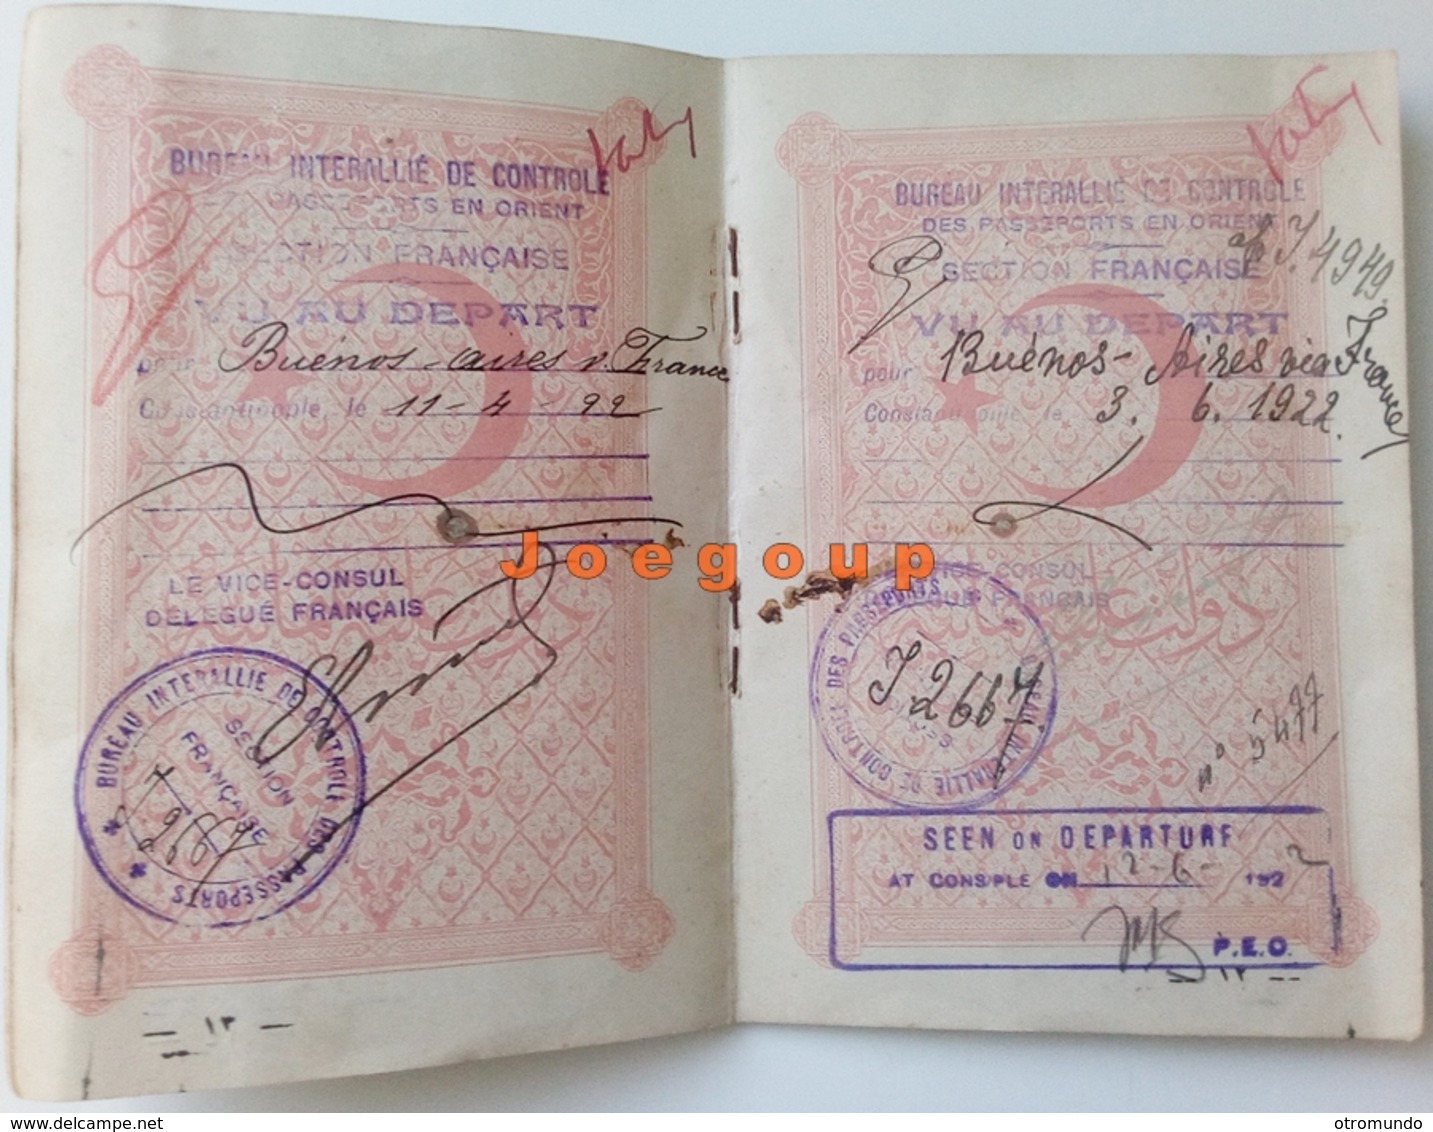 Passport Ottoman Empire Buenos Aires Argentina Via Marsella France 1922 Fiscal Stamps - Historical Documents